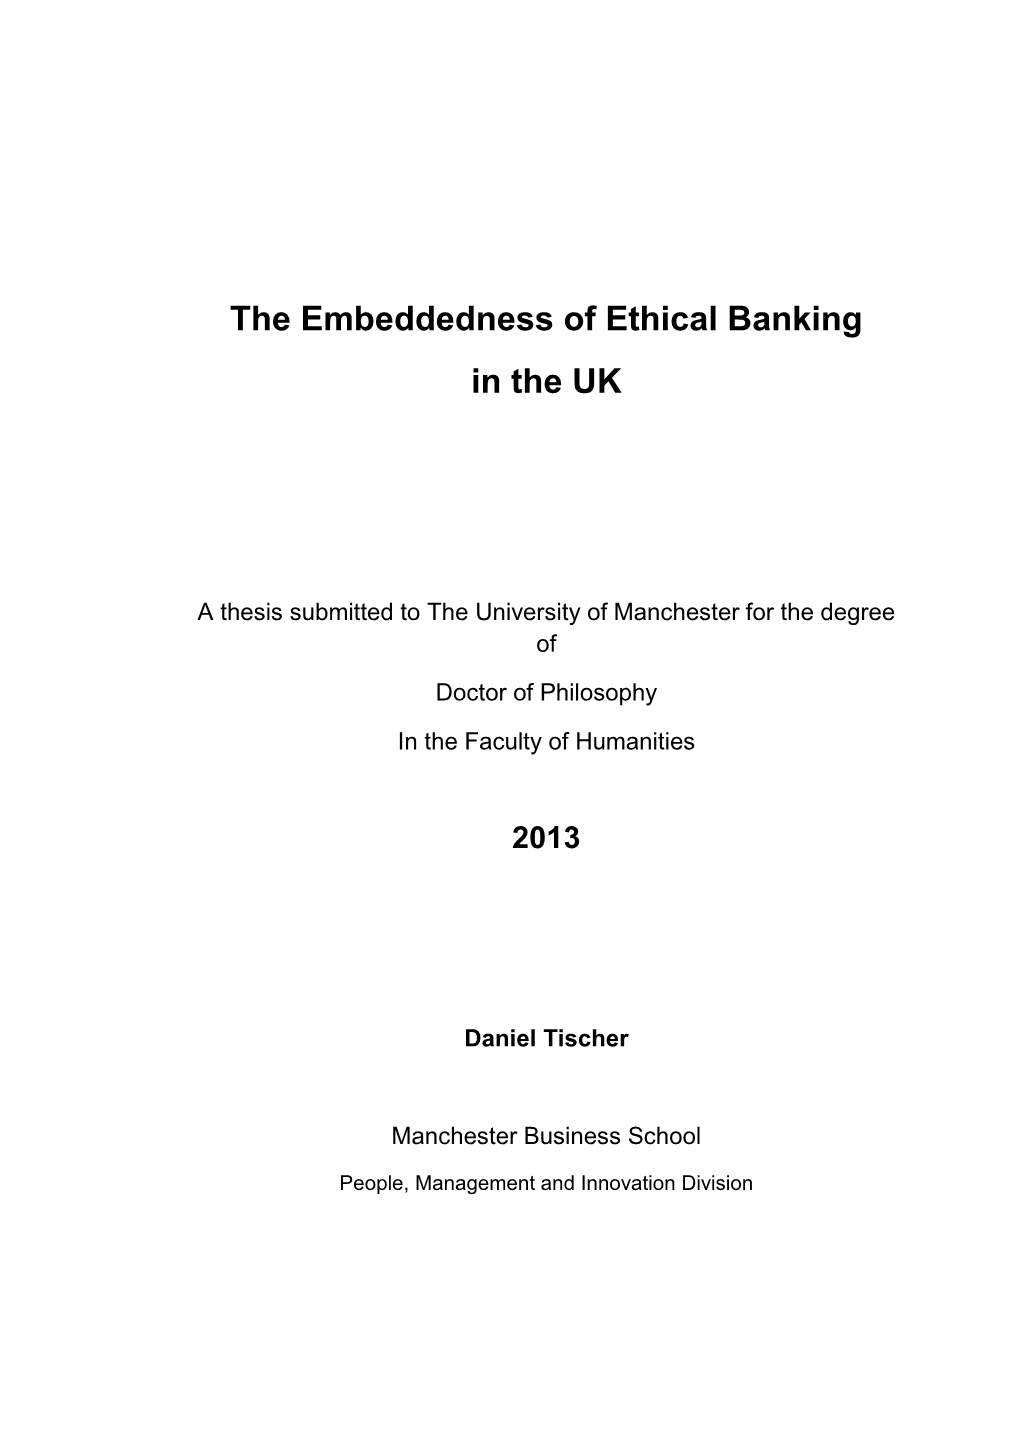 The Embeddedness of Ethical Banking in the UK